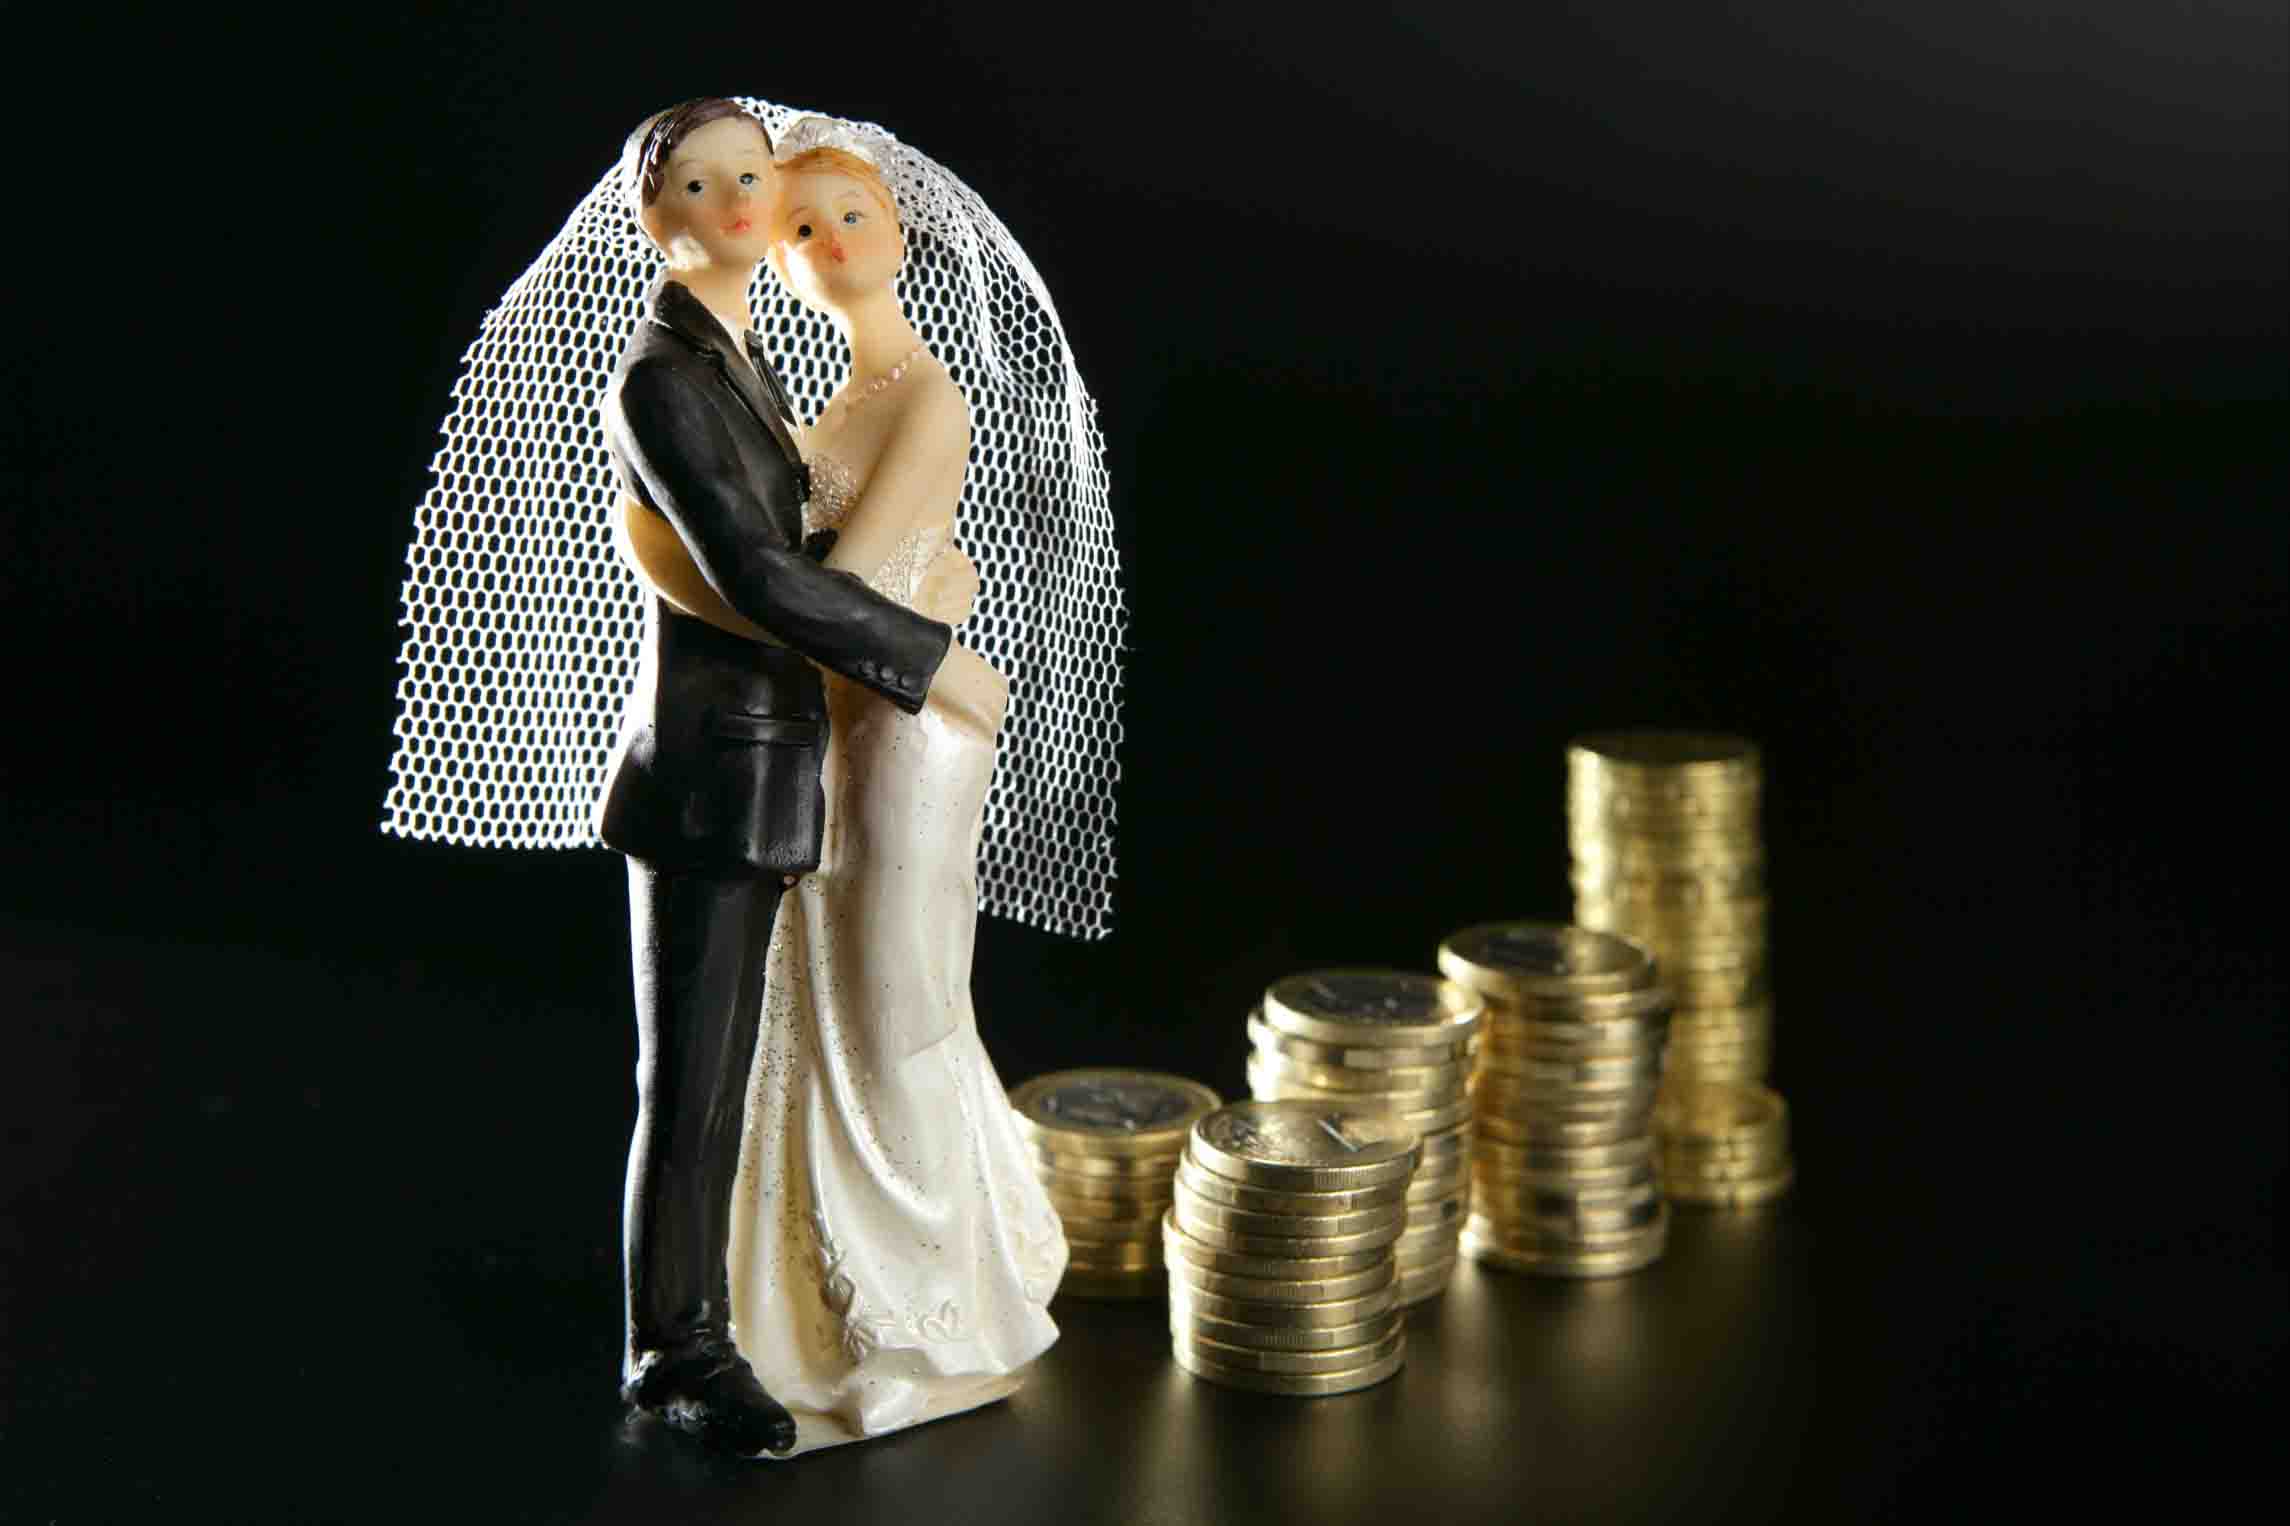 wedding couple figurine and golden coins